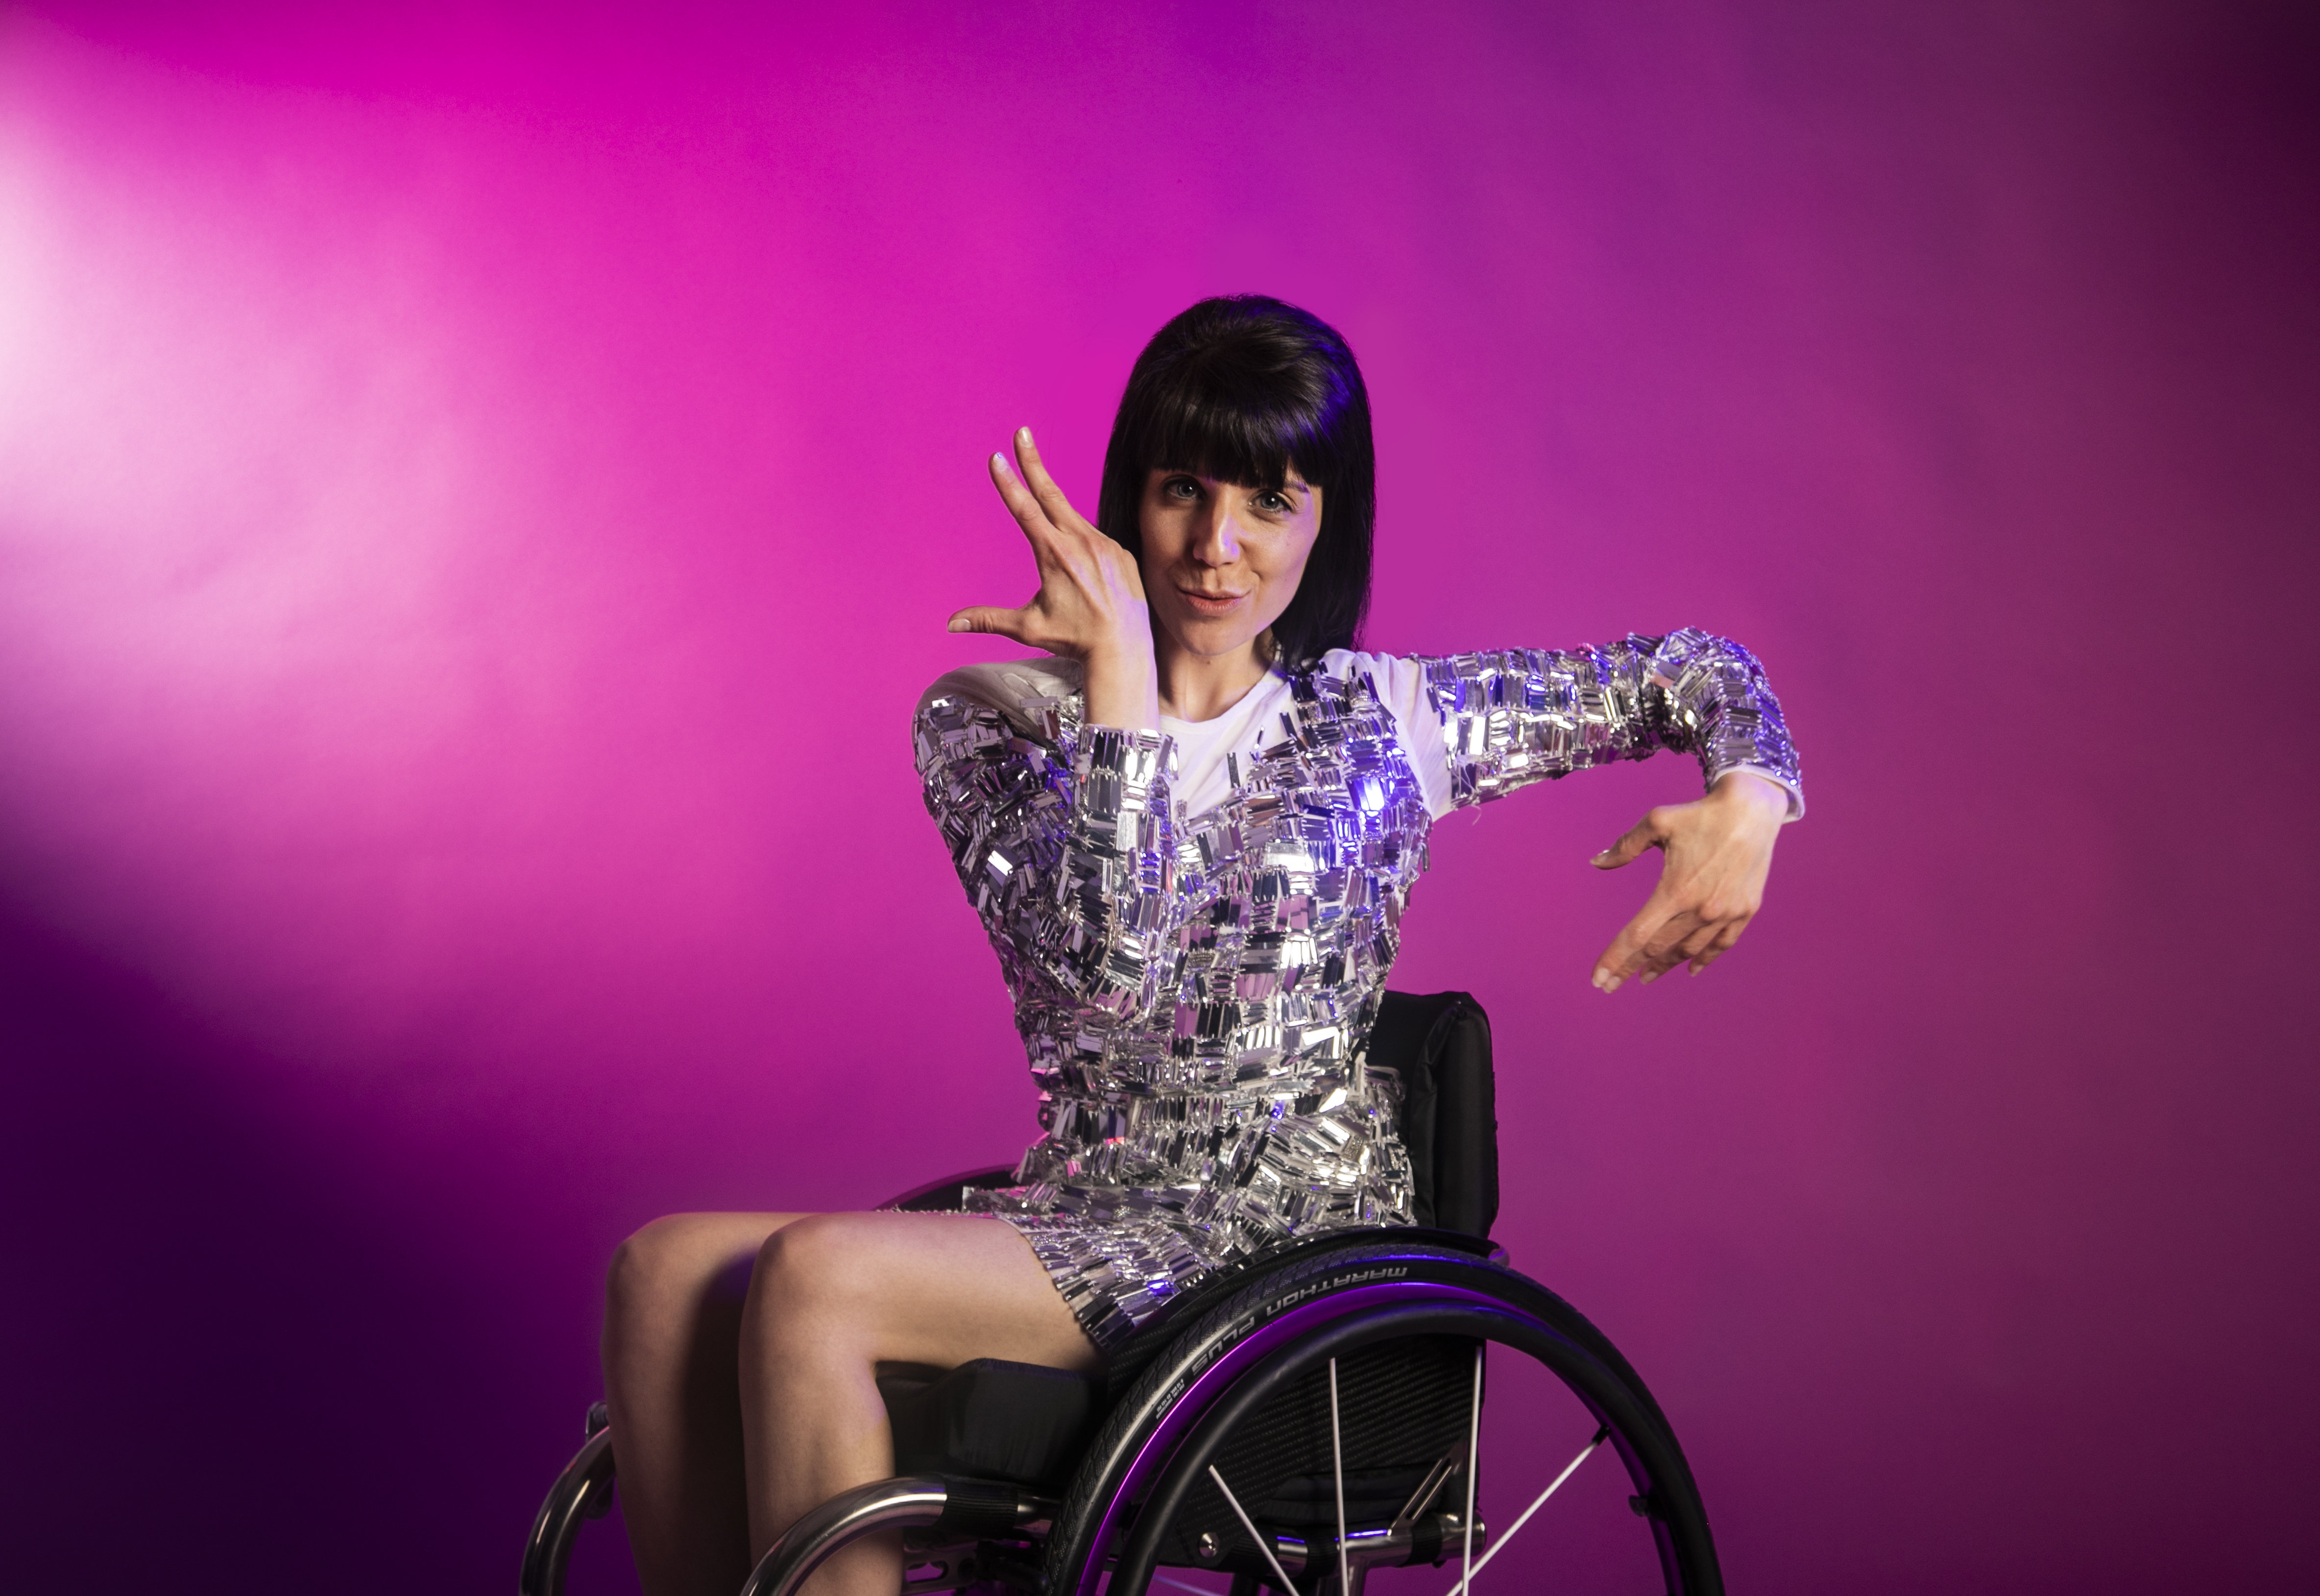 white brunette female dancer in a wheelchair wearing silver sparkly dress. Both hands in salsa movement around her face. On a pink photo backdrop